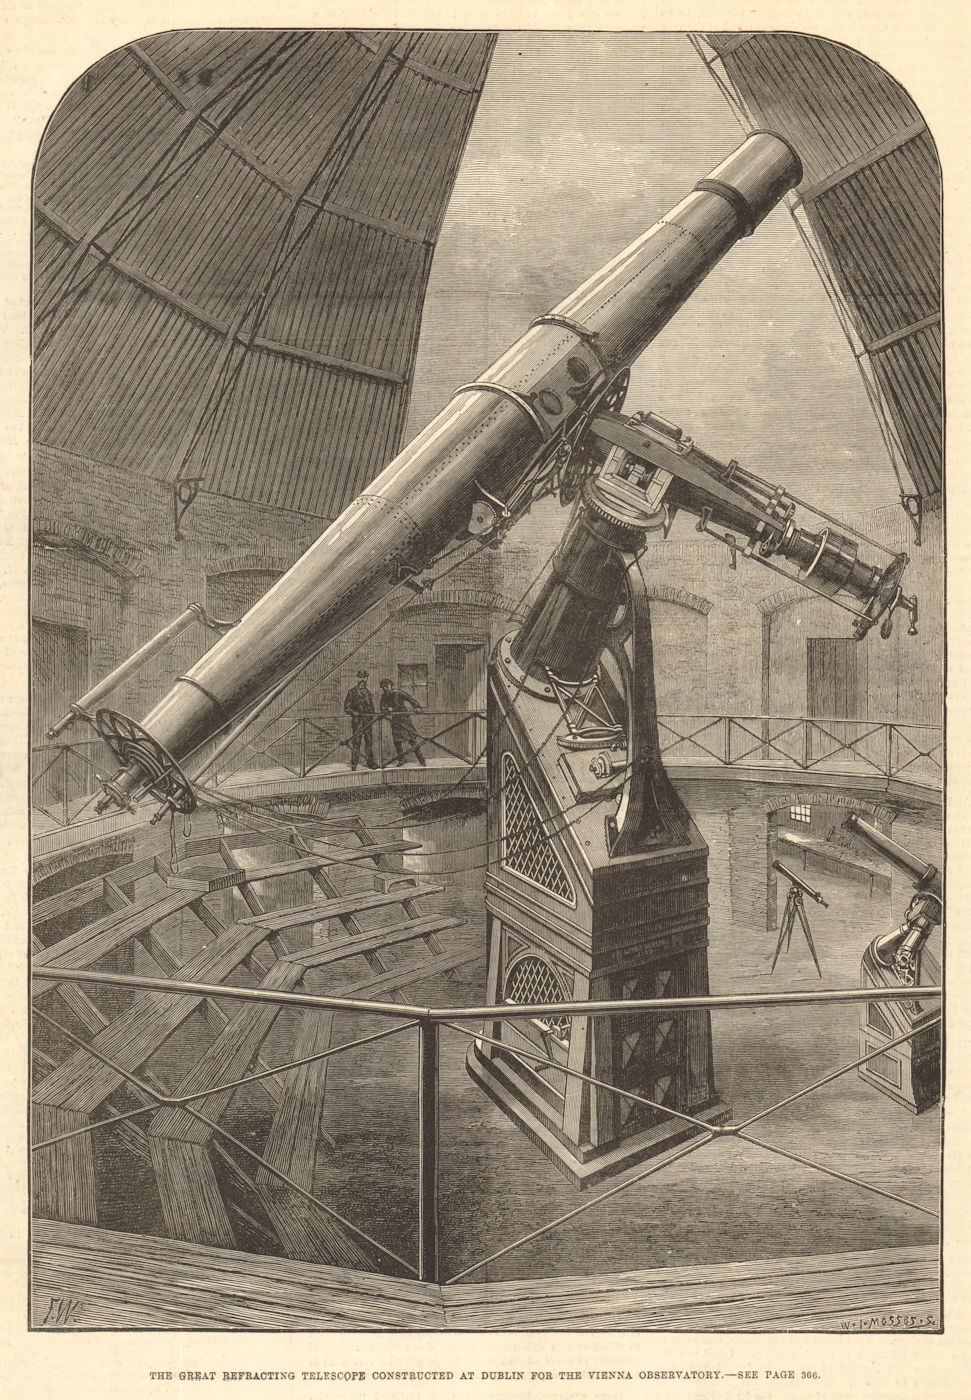 The refracting telescope constructed in Dublin for the Vienna observatory 1881